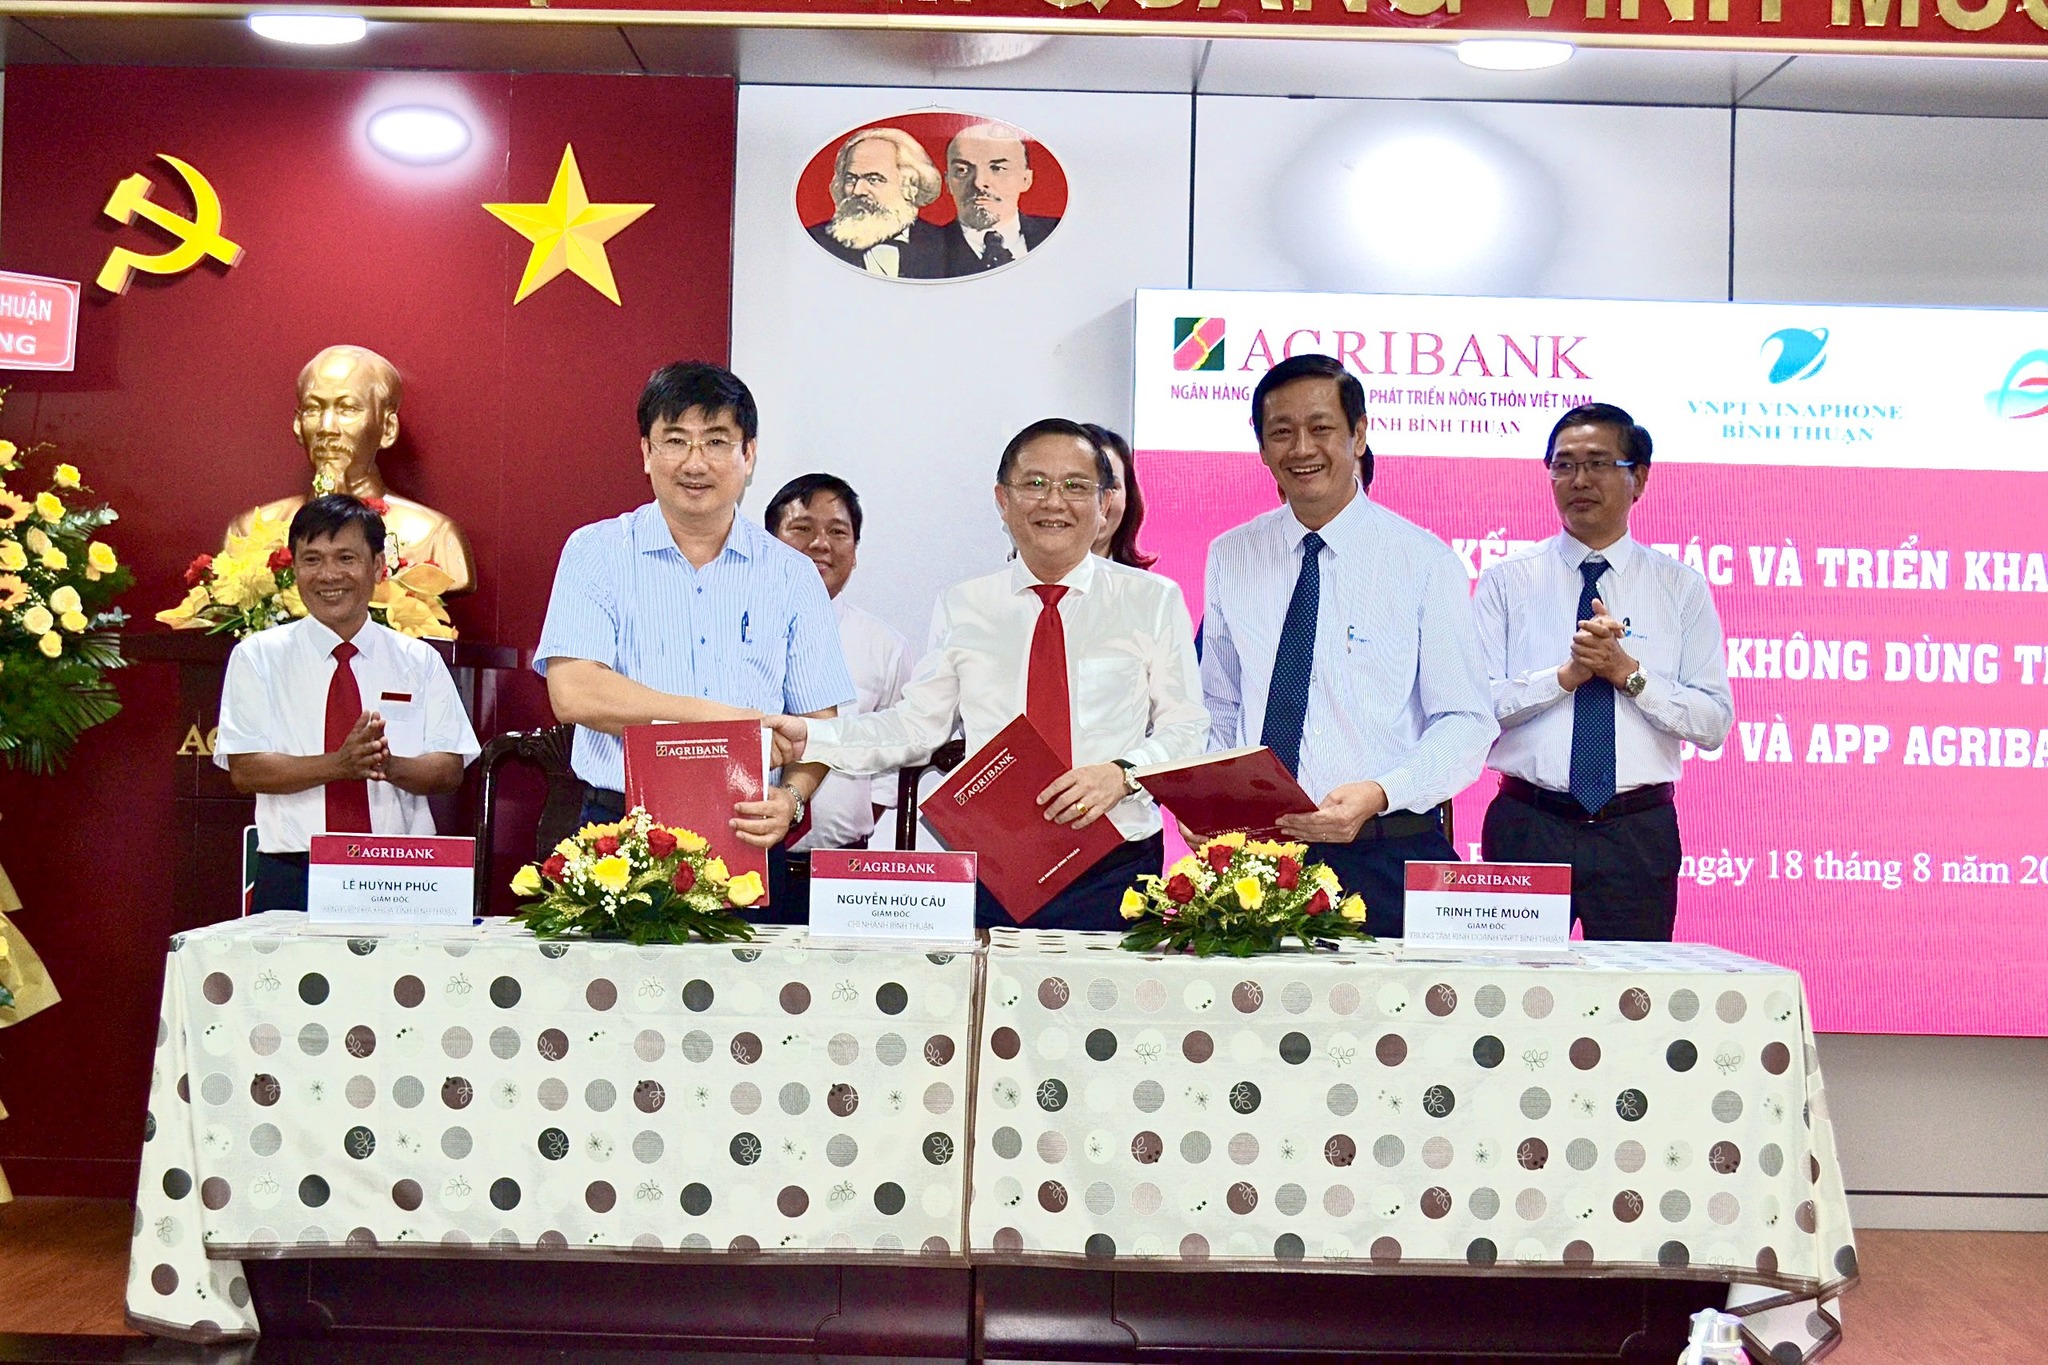 VNPT signs cooperation agreement with Agribank and Binh Thuan Provincial General Hospital